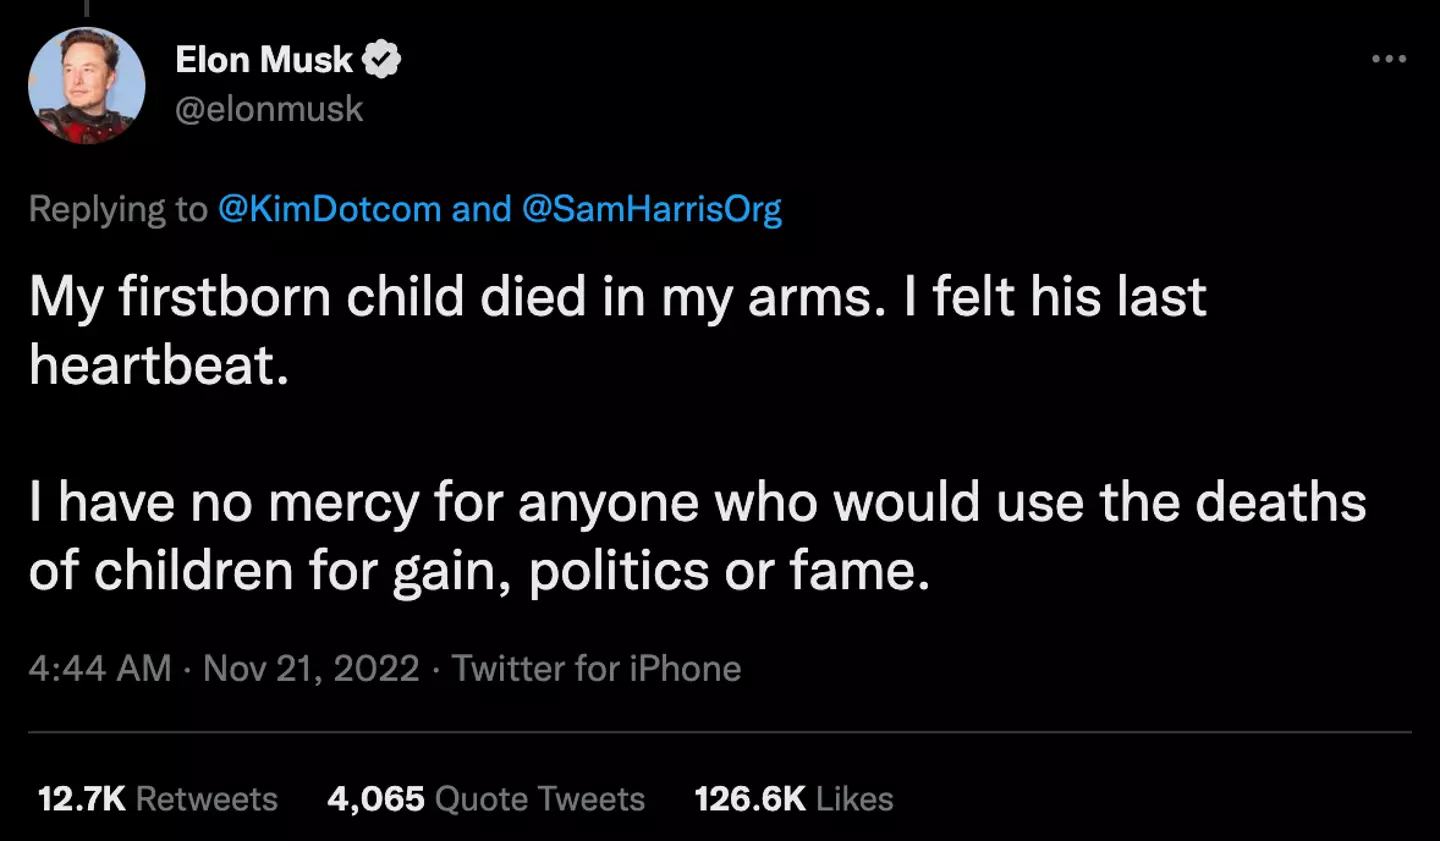 Musk claims his firstborn child passed away in his arms.